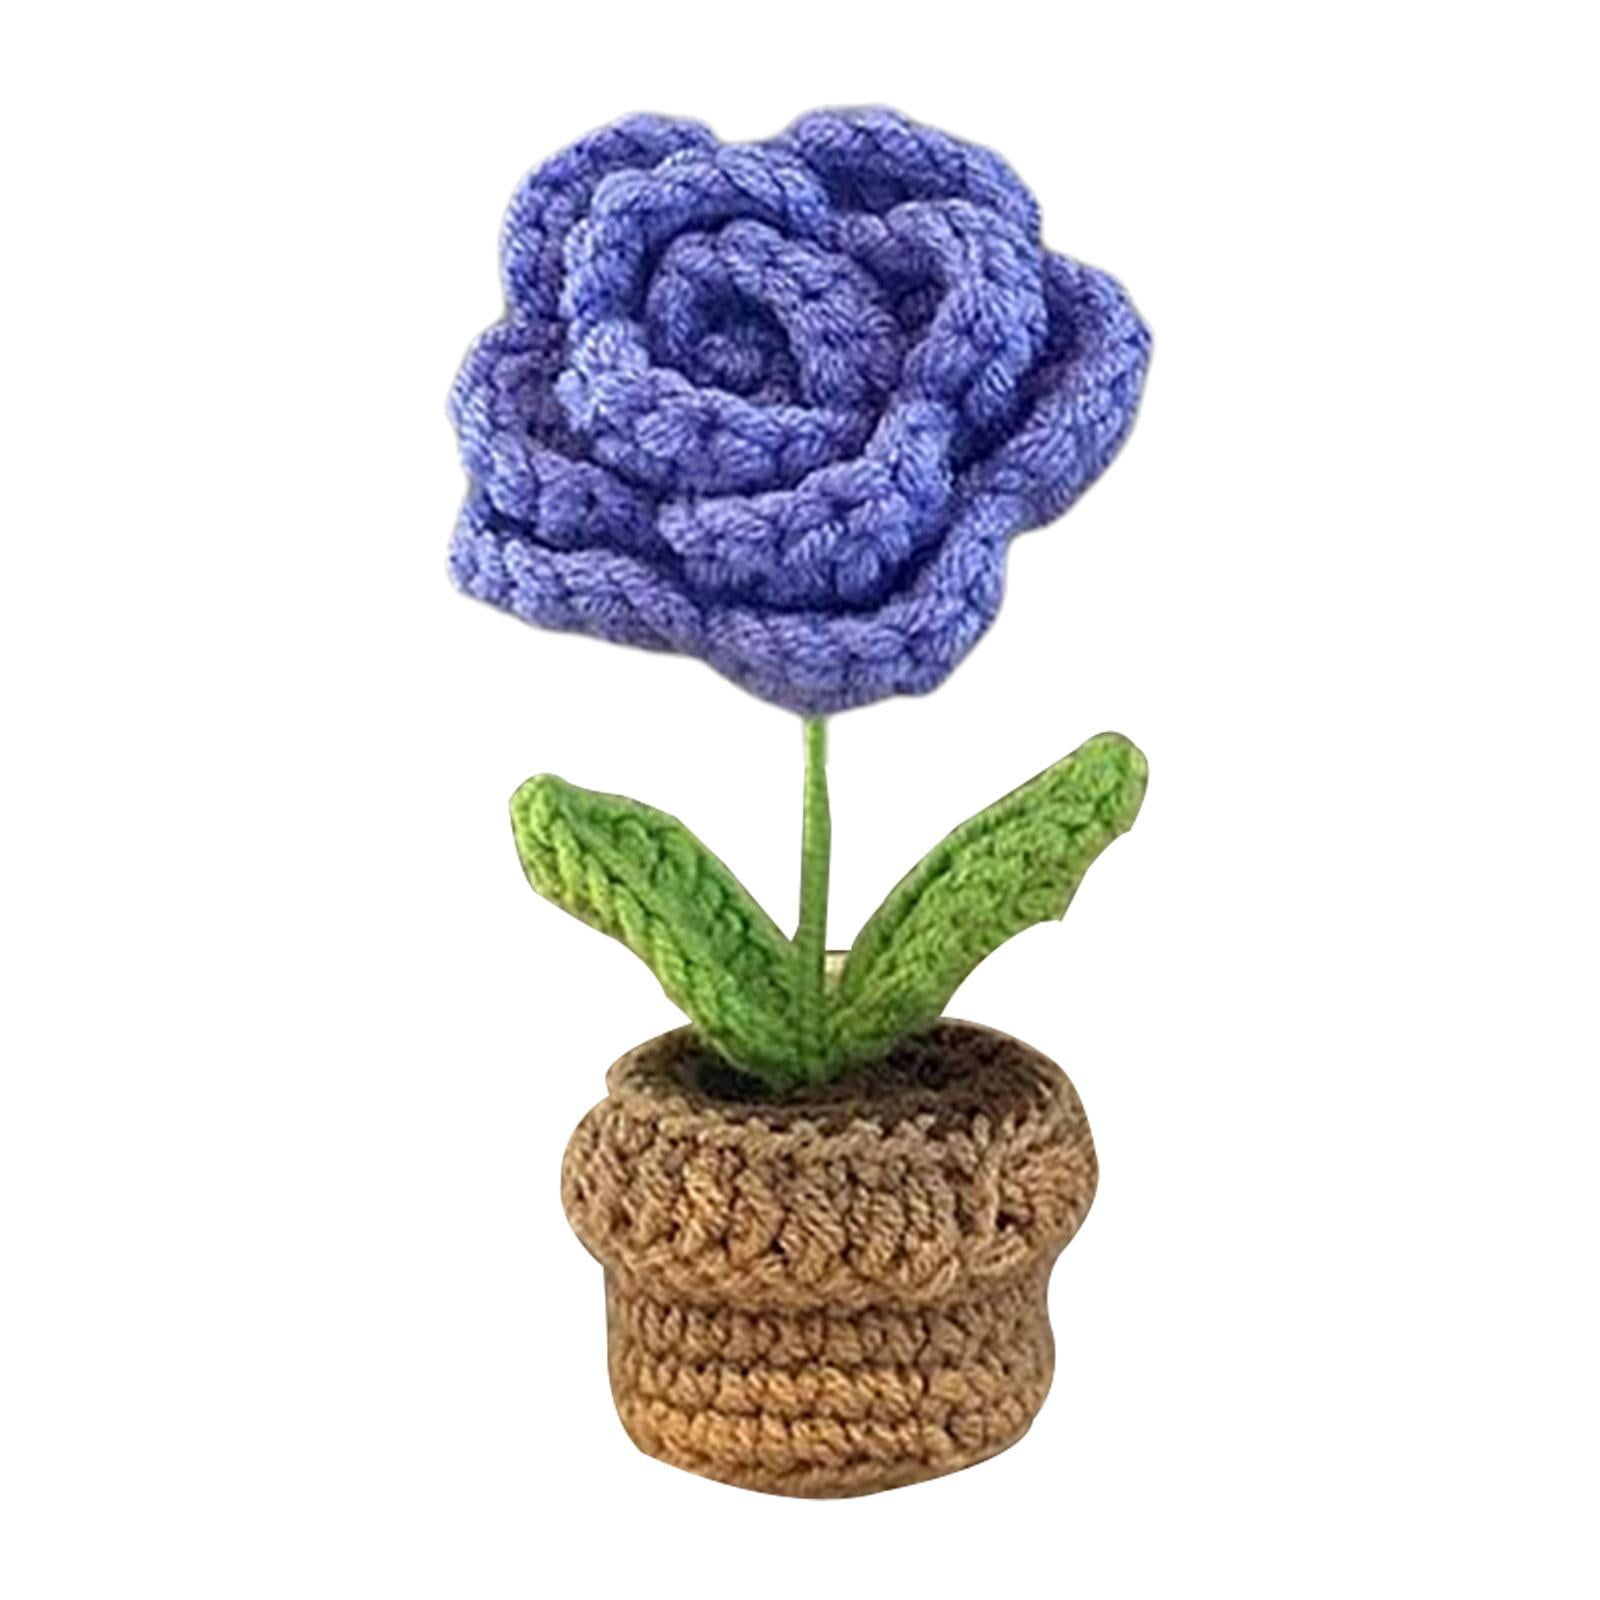 Beginner's Diy Crochet Flower Kit, Romantic Knitted Rose Pot, Simple To  Learn, Suitable For Newbies, Used For Festival Gifts, Decoration,  Entertainment, Etc., Comes With Step-by-step Instructional Video In  English, Instruction Manual, Yarn